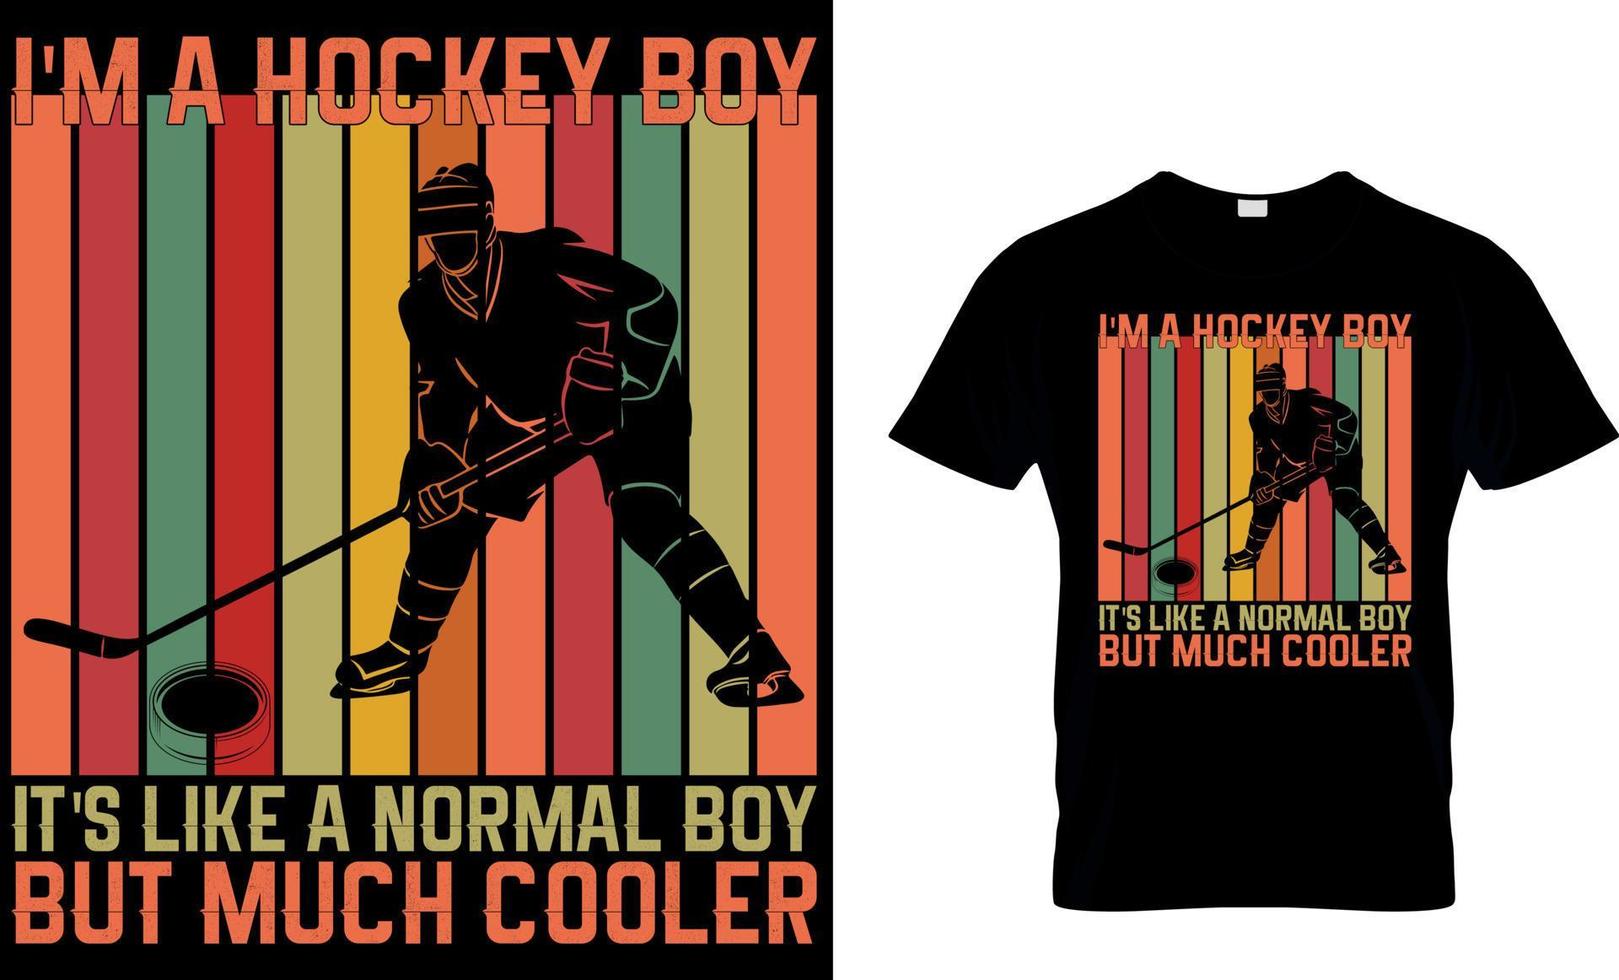 Ice hockey T-shirt design vector Graphic. I'm a hockey boy it's like a normal boy but much cooler.